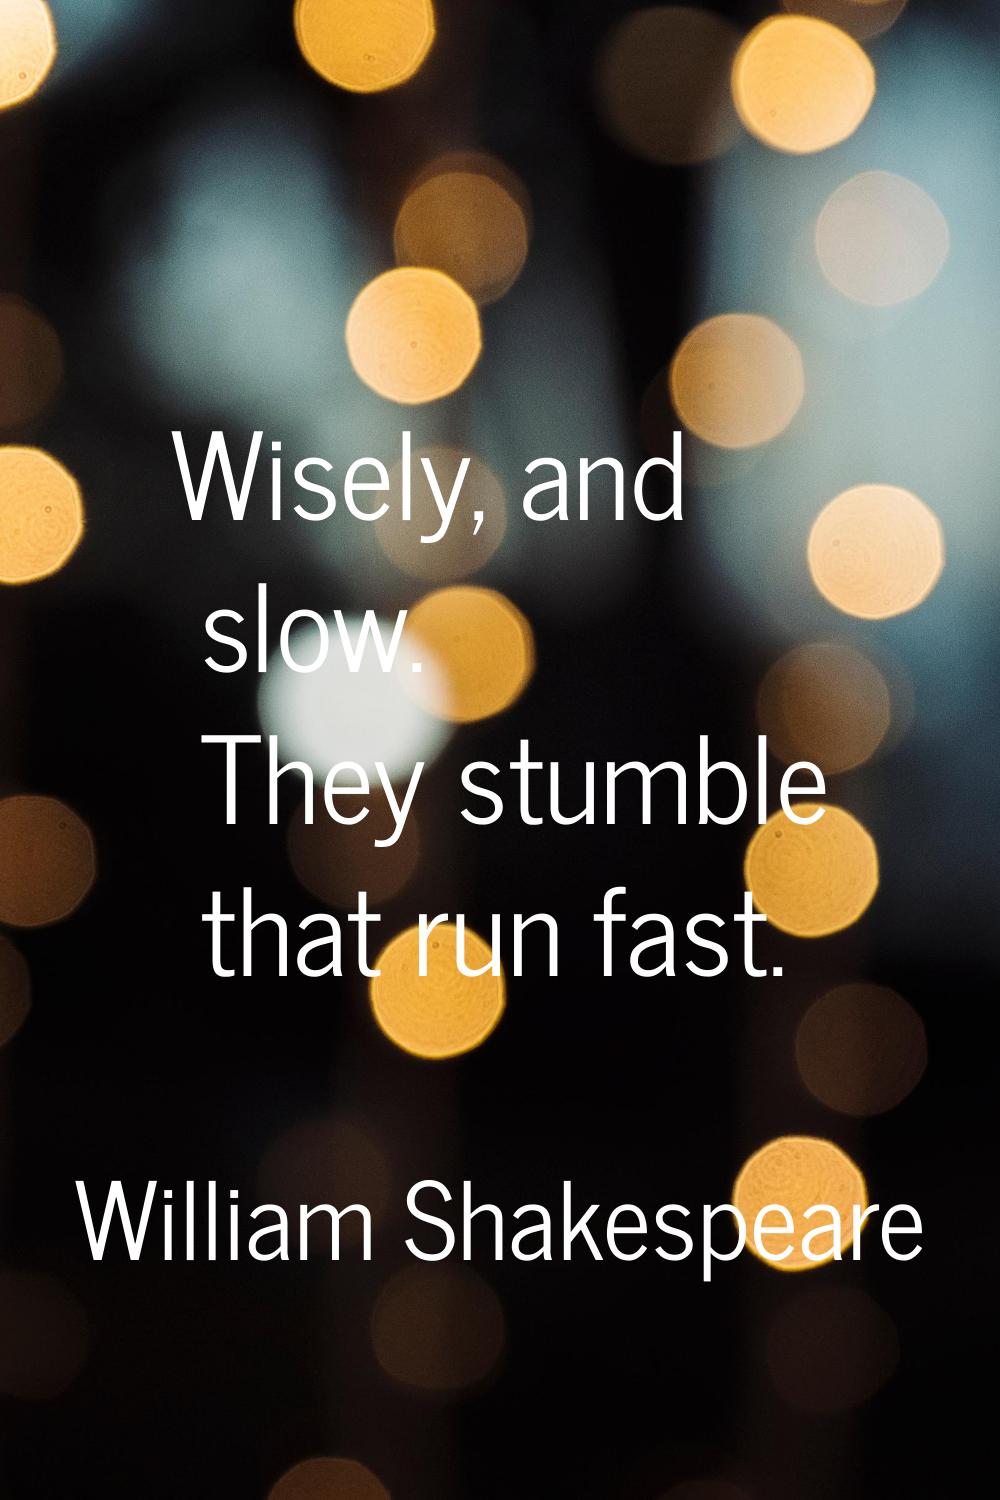 Wisely, and slow. They stumble that run fast.